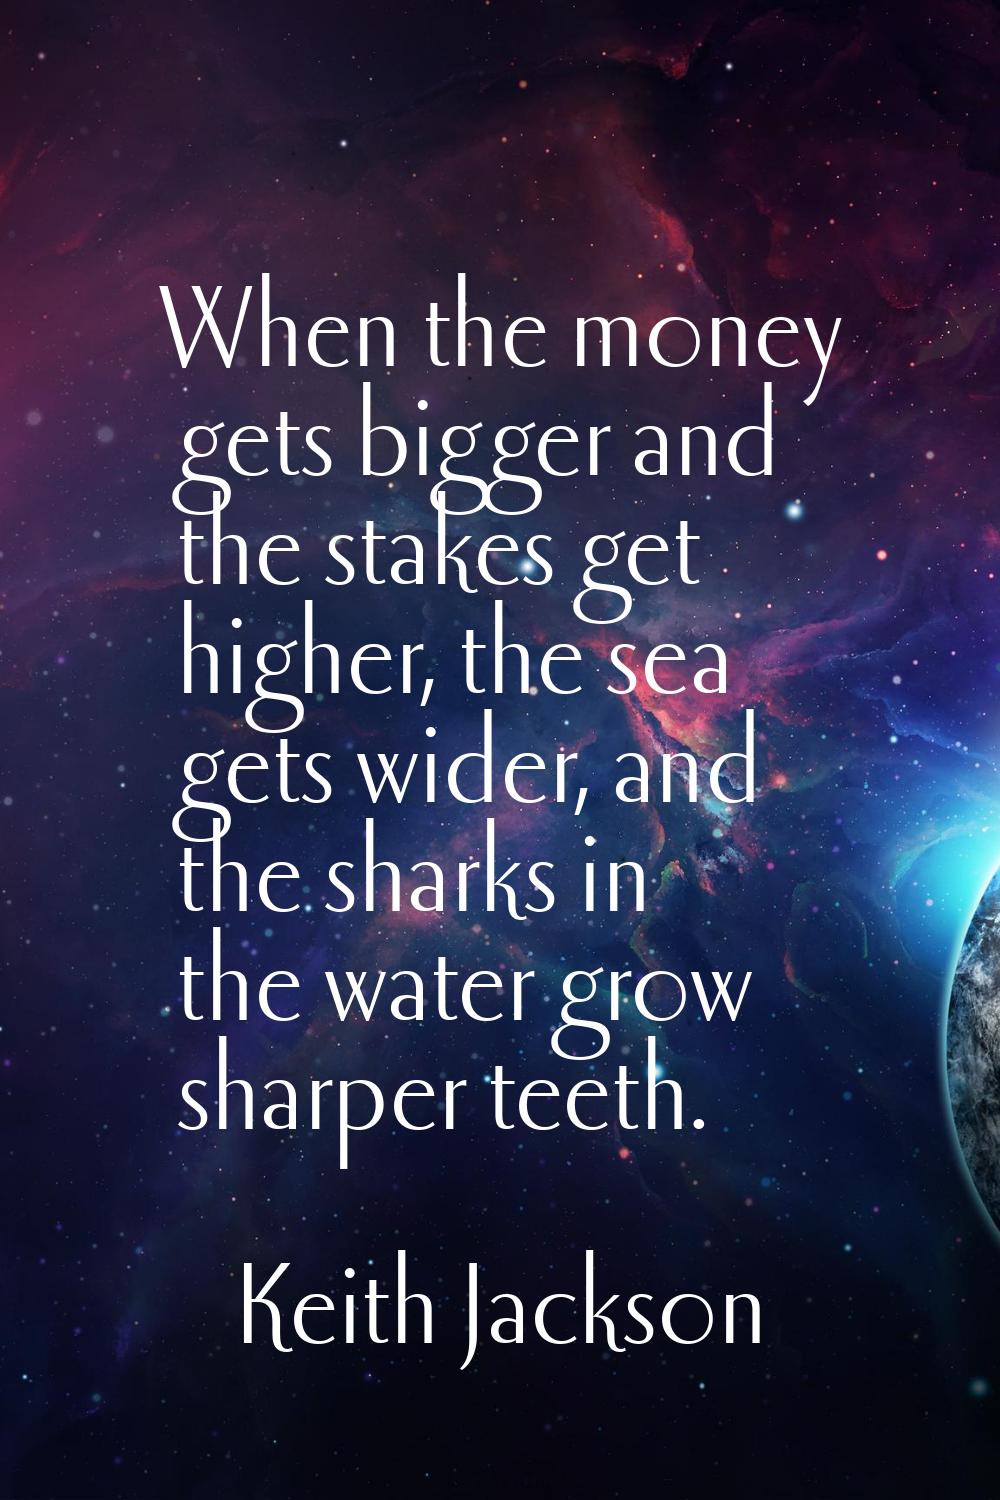 When the money gets bigger and the stakes get higher, the sea gets wider, and the sharks in the wat